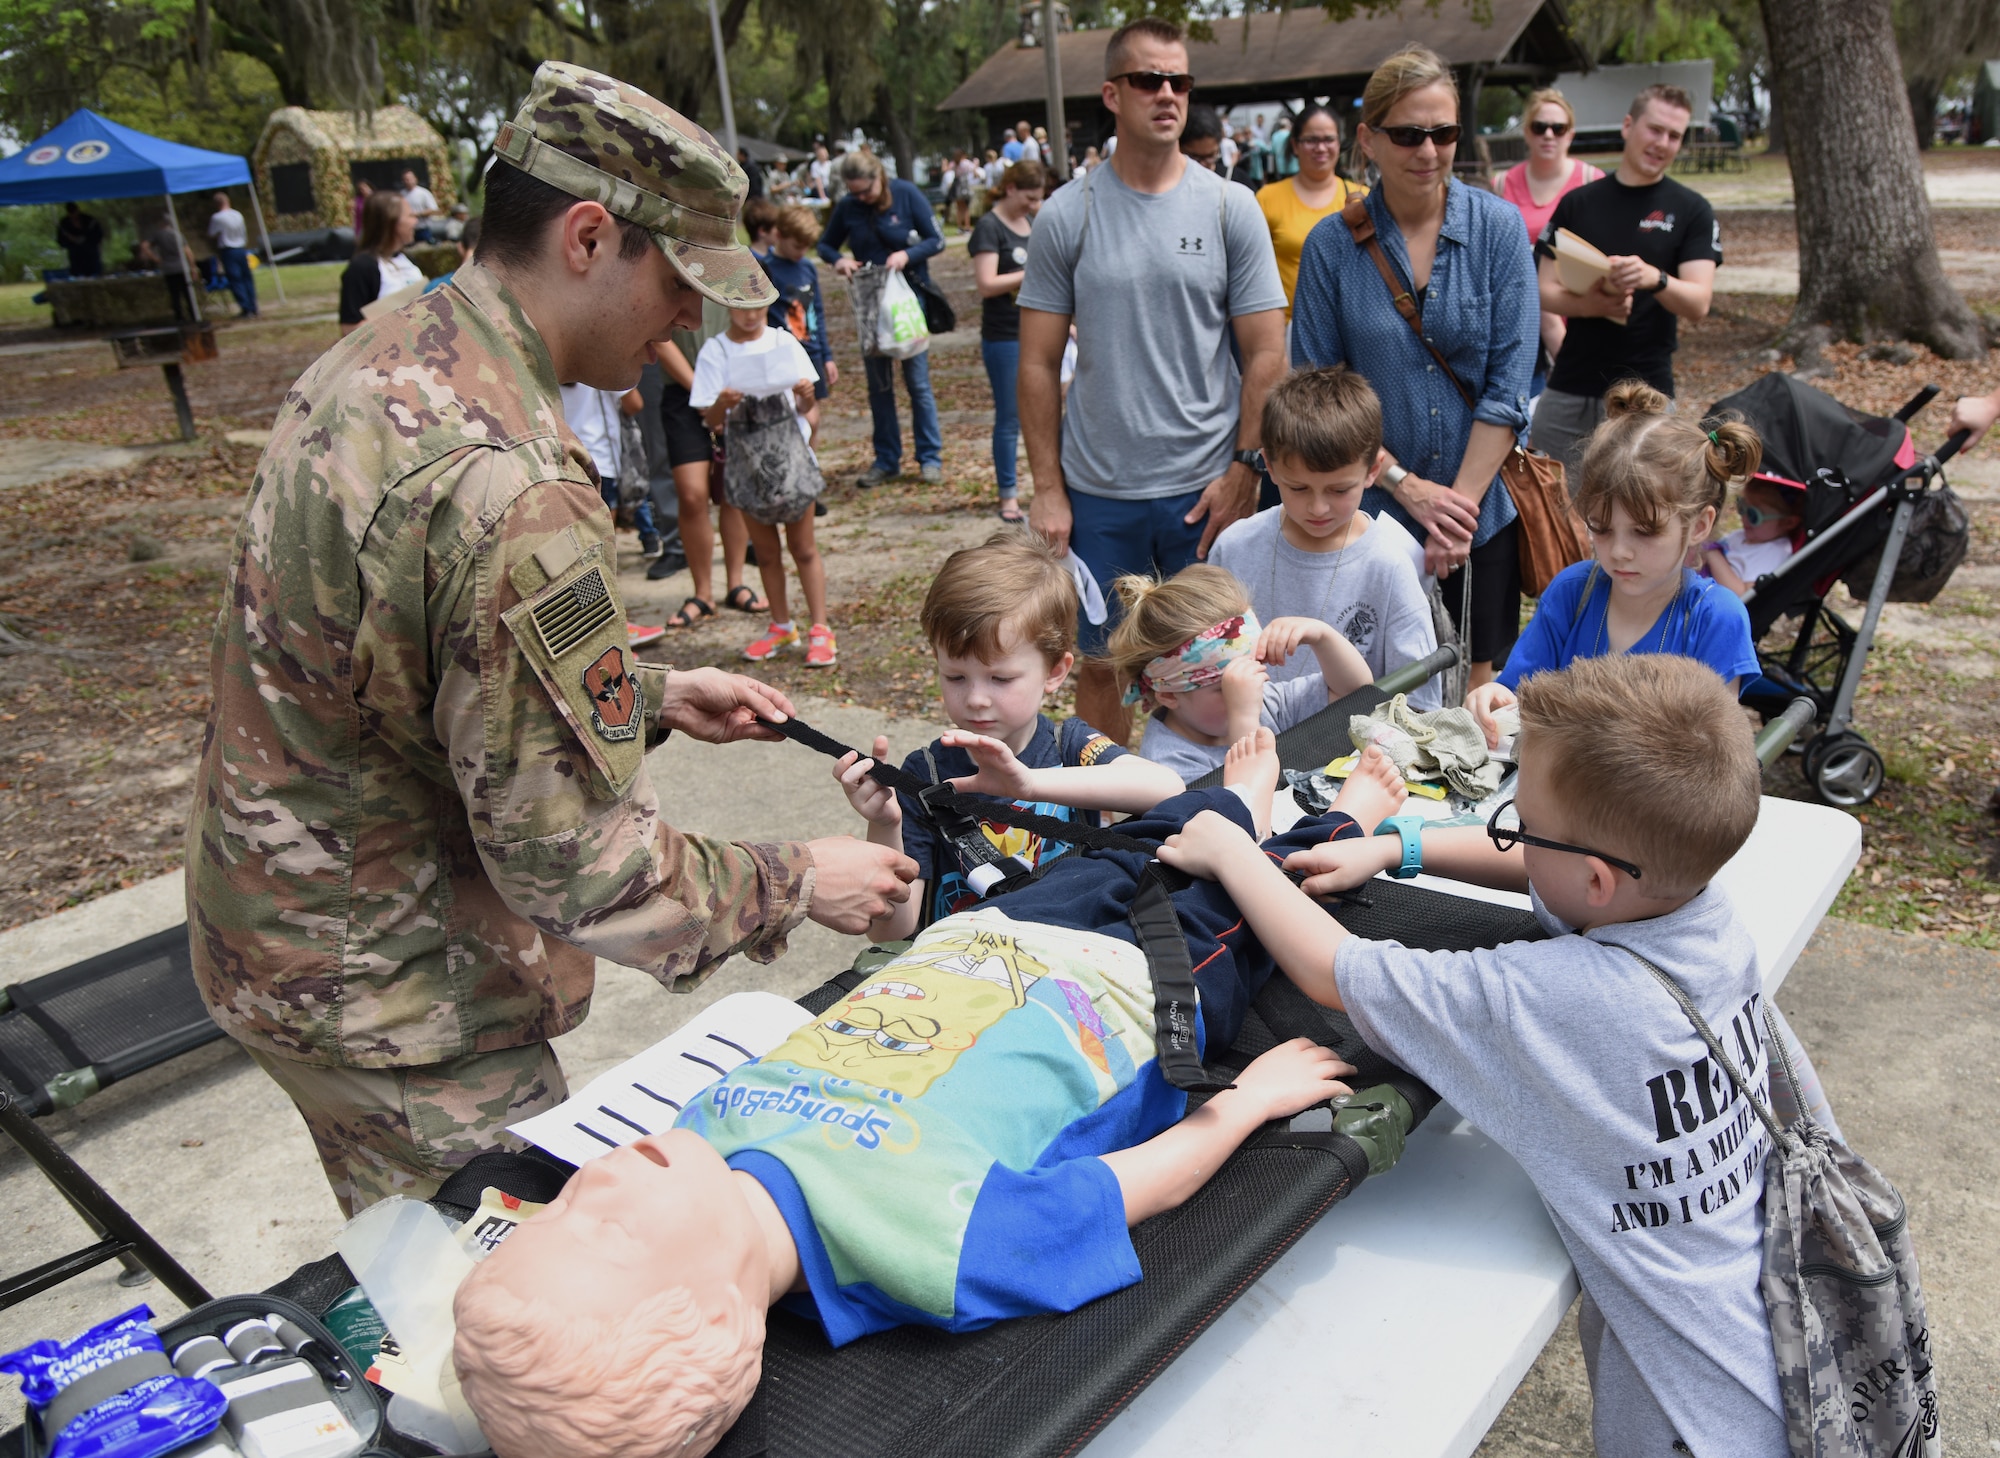 U.S. Air Force Senior Airman Brock Mauldin, 81st Medical Support Squadron education and training self aid buddy care wing advisor, provides a medical triage demonstration to military children during Operation Hero at Keesler Air Force Base, Mississippi, April 6, 2019. The event, hosted by the Airman and Family Readiness Center in recognition of the Month of the Military Child, gave military children a glimpse into the lives of deployed military members. Children received Operation Hero dog tags and t-shirts as they made their way through the mock deployment line as well as the opportunity to experience medical triage demonstrations, gas mask training and have their faces painted. (U.S. Air Force photo by Kemberly Groue)